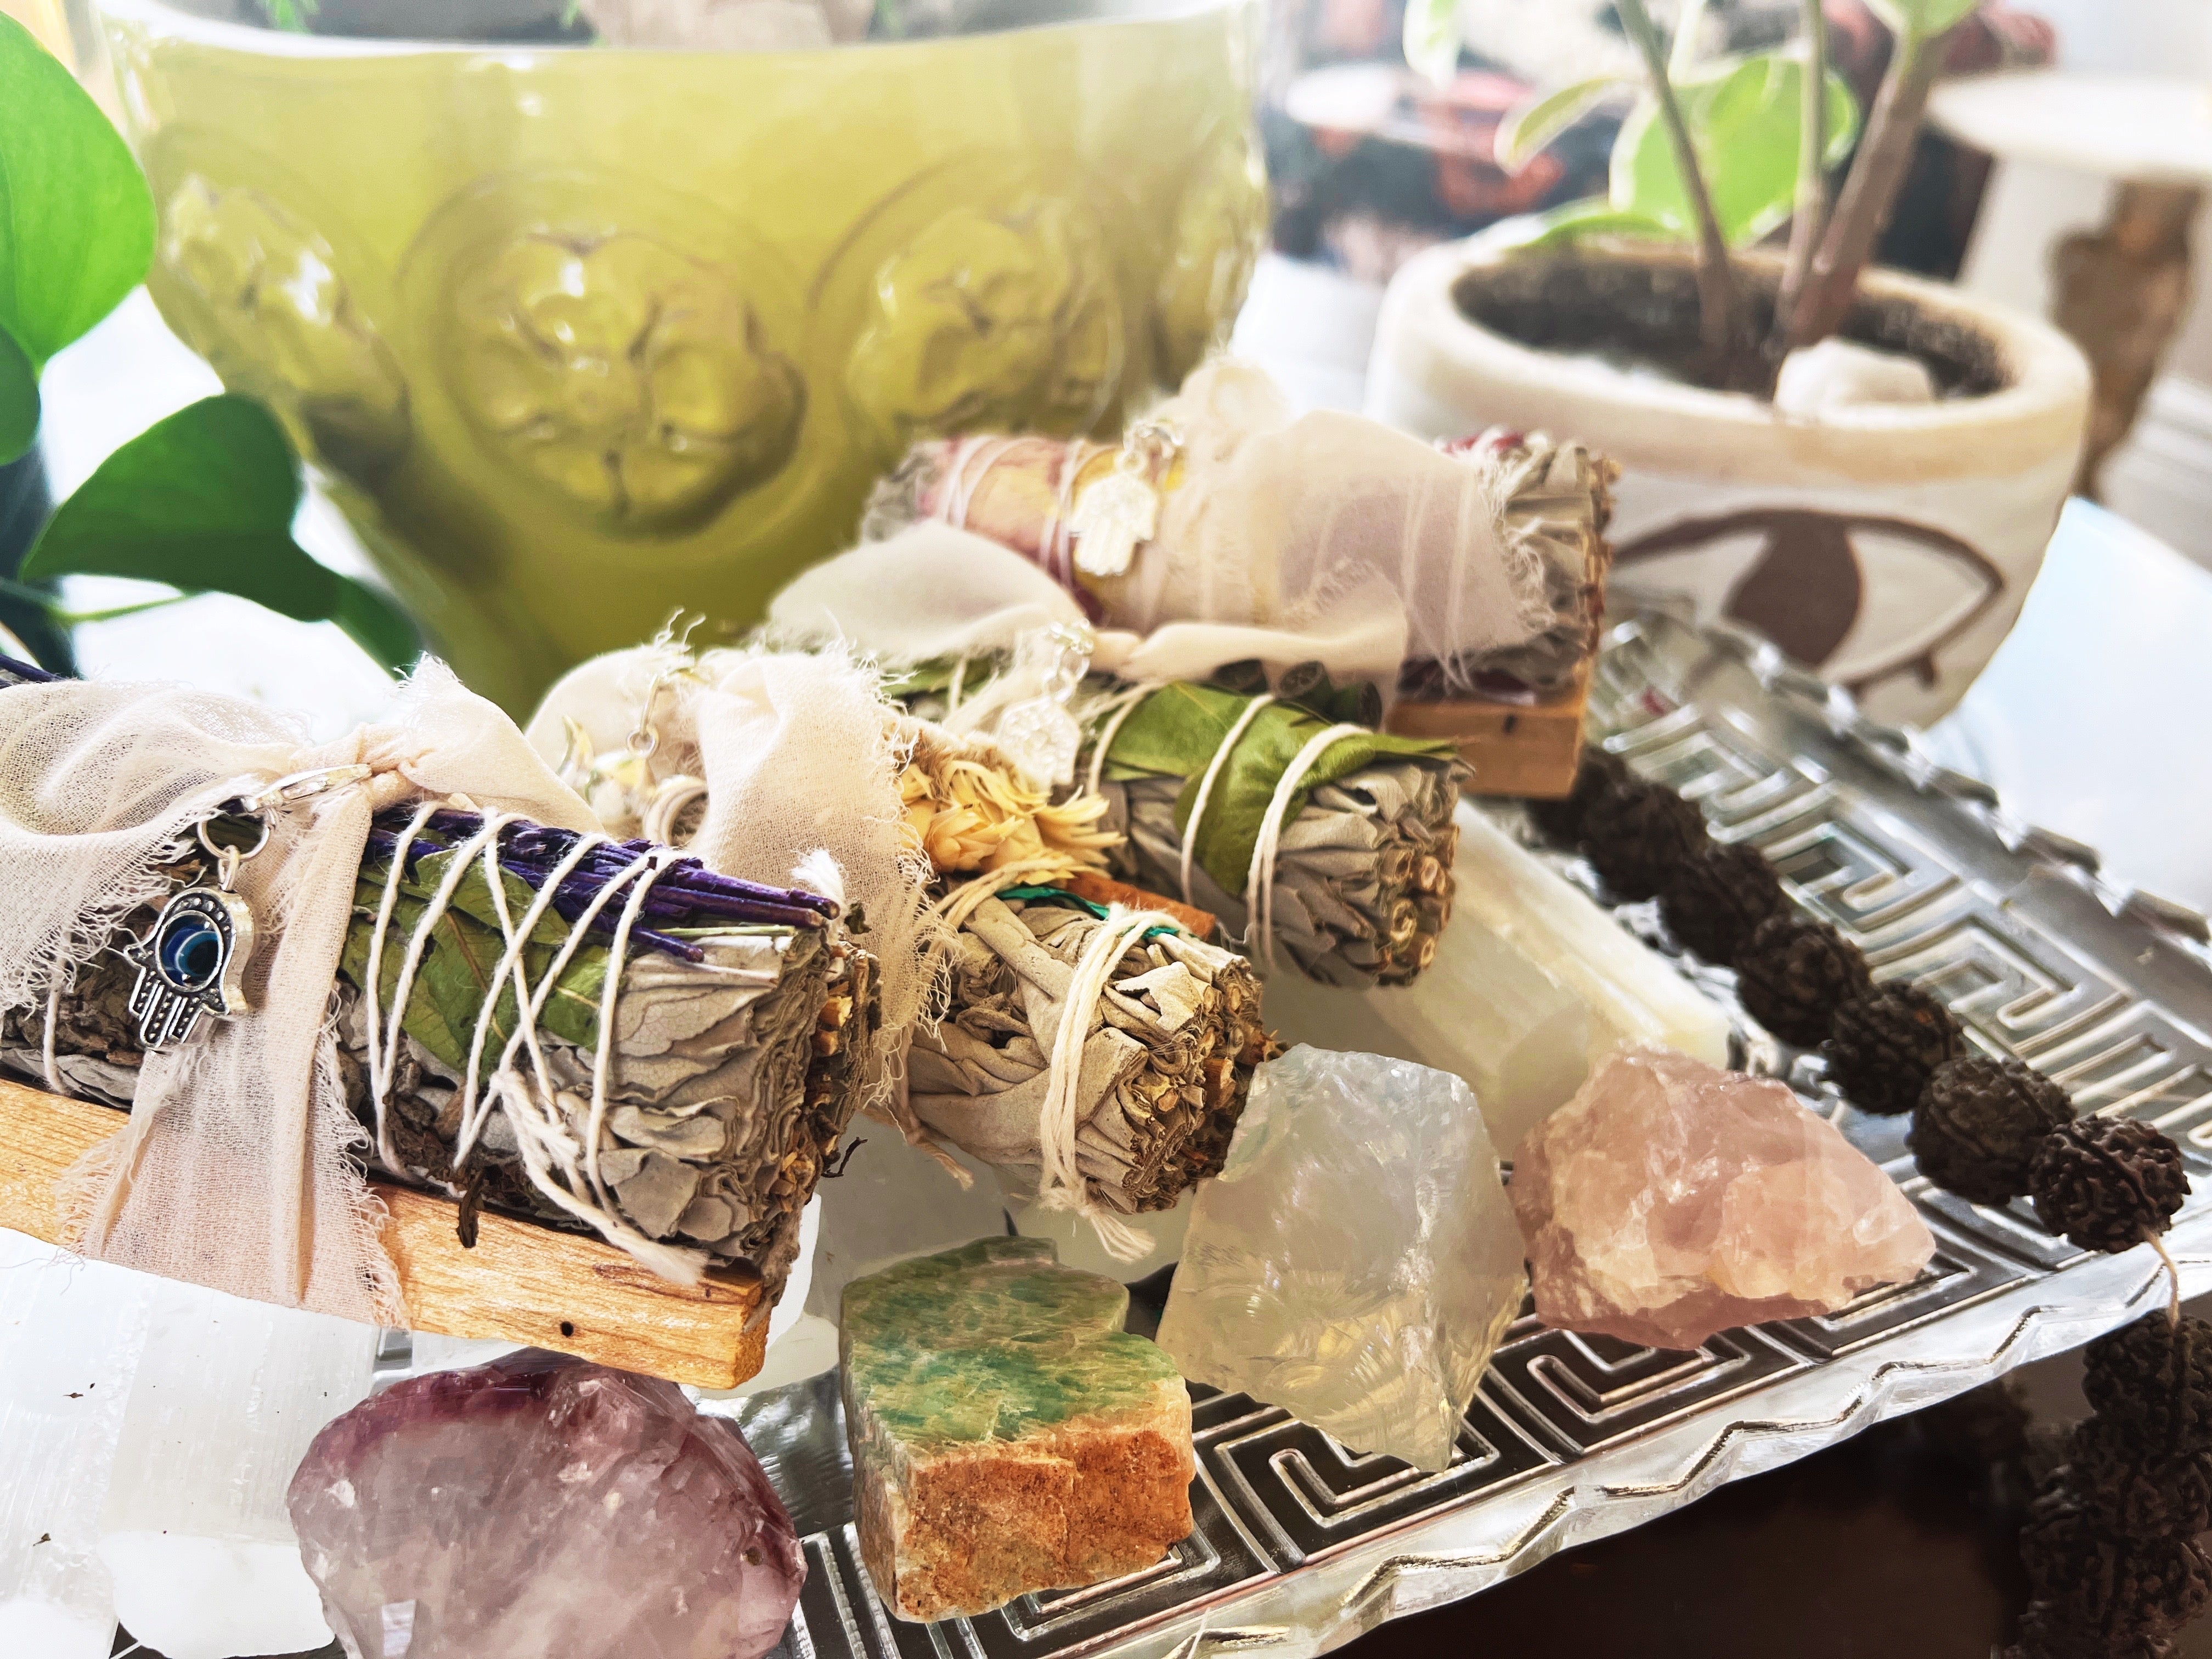 YOUR DAY WILL COME << WHITE SAGE WITH ROSES, PALO SANTO, ROSE QUARTZ >> RITUAL KIT